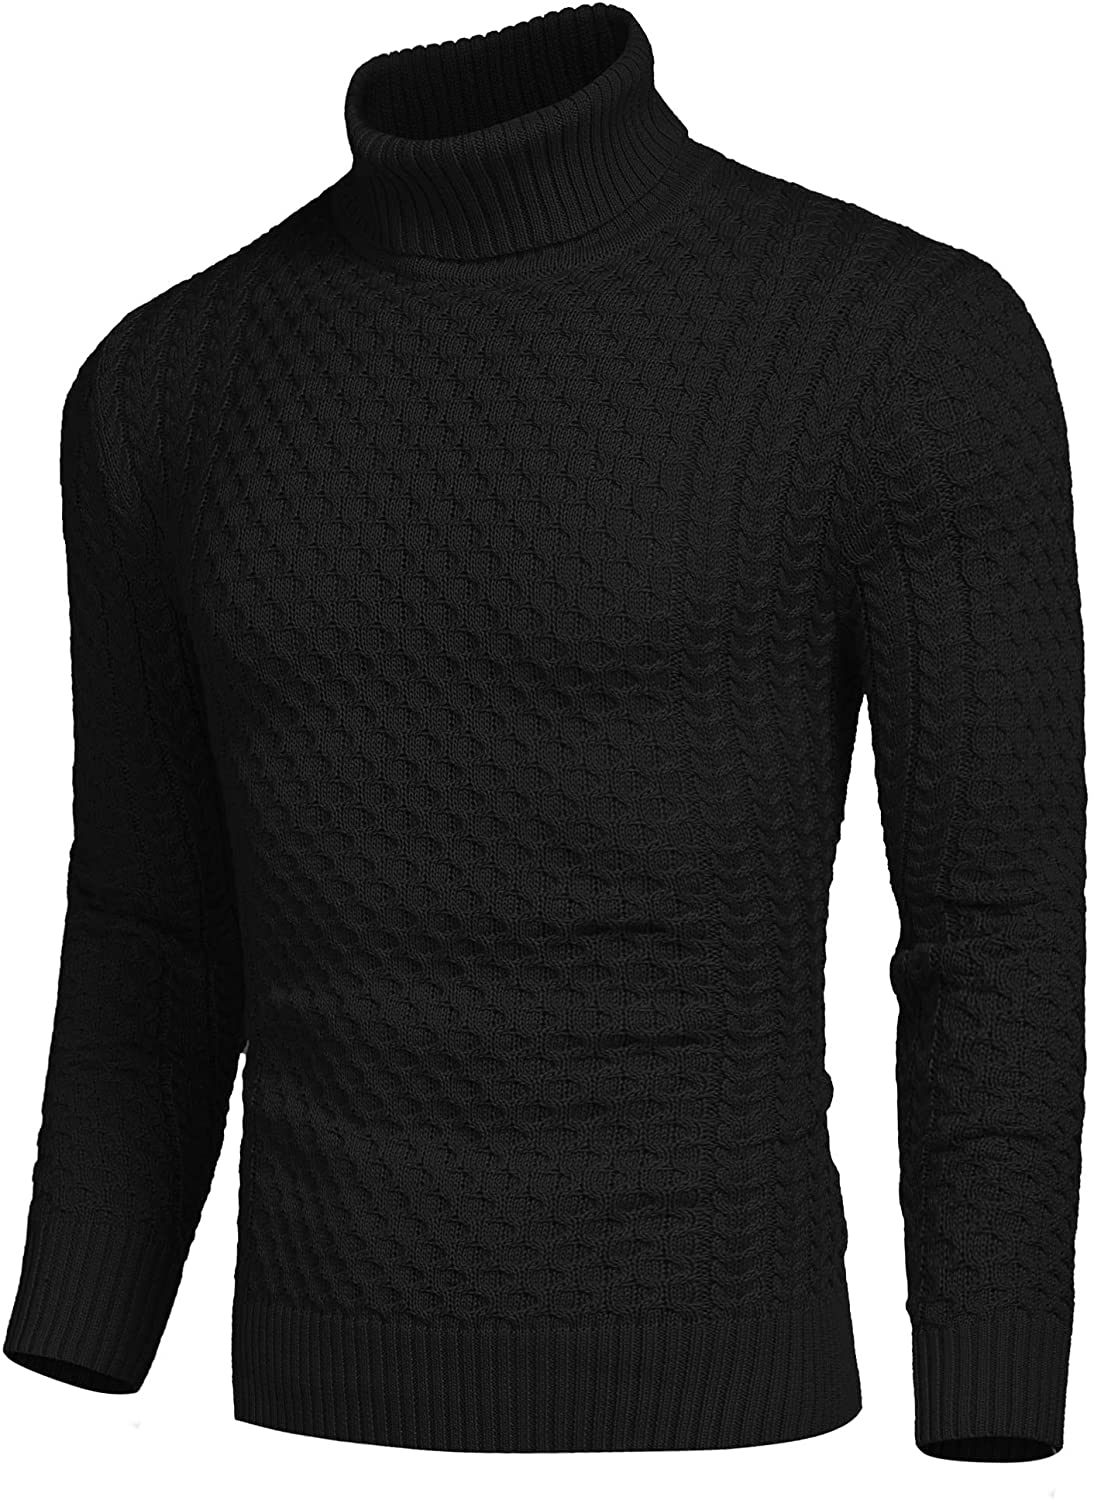 COOFANDY Men's Slim Fit Turtleneck Sweater Casual Knitted Twisted ...